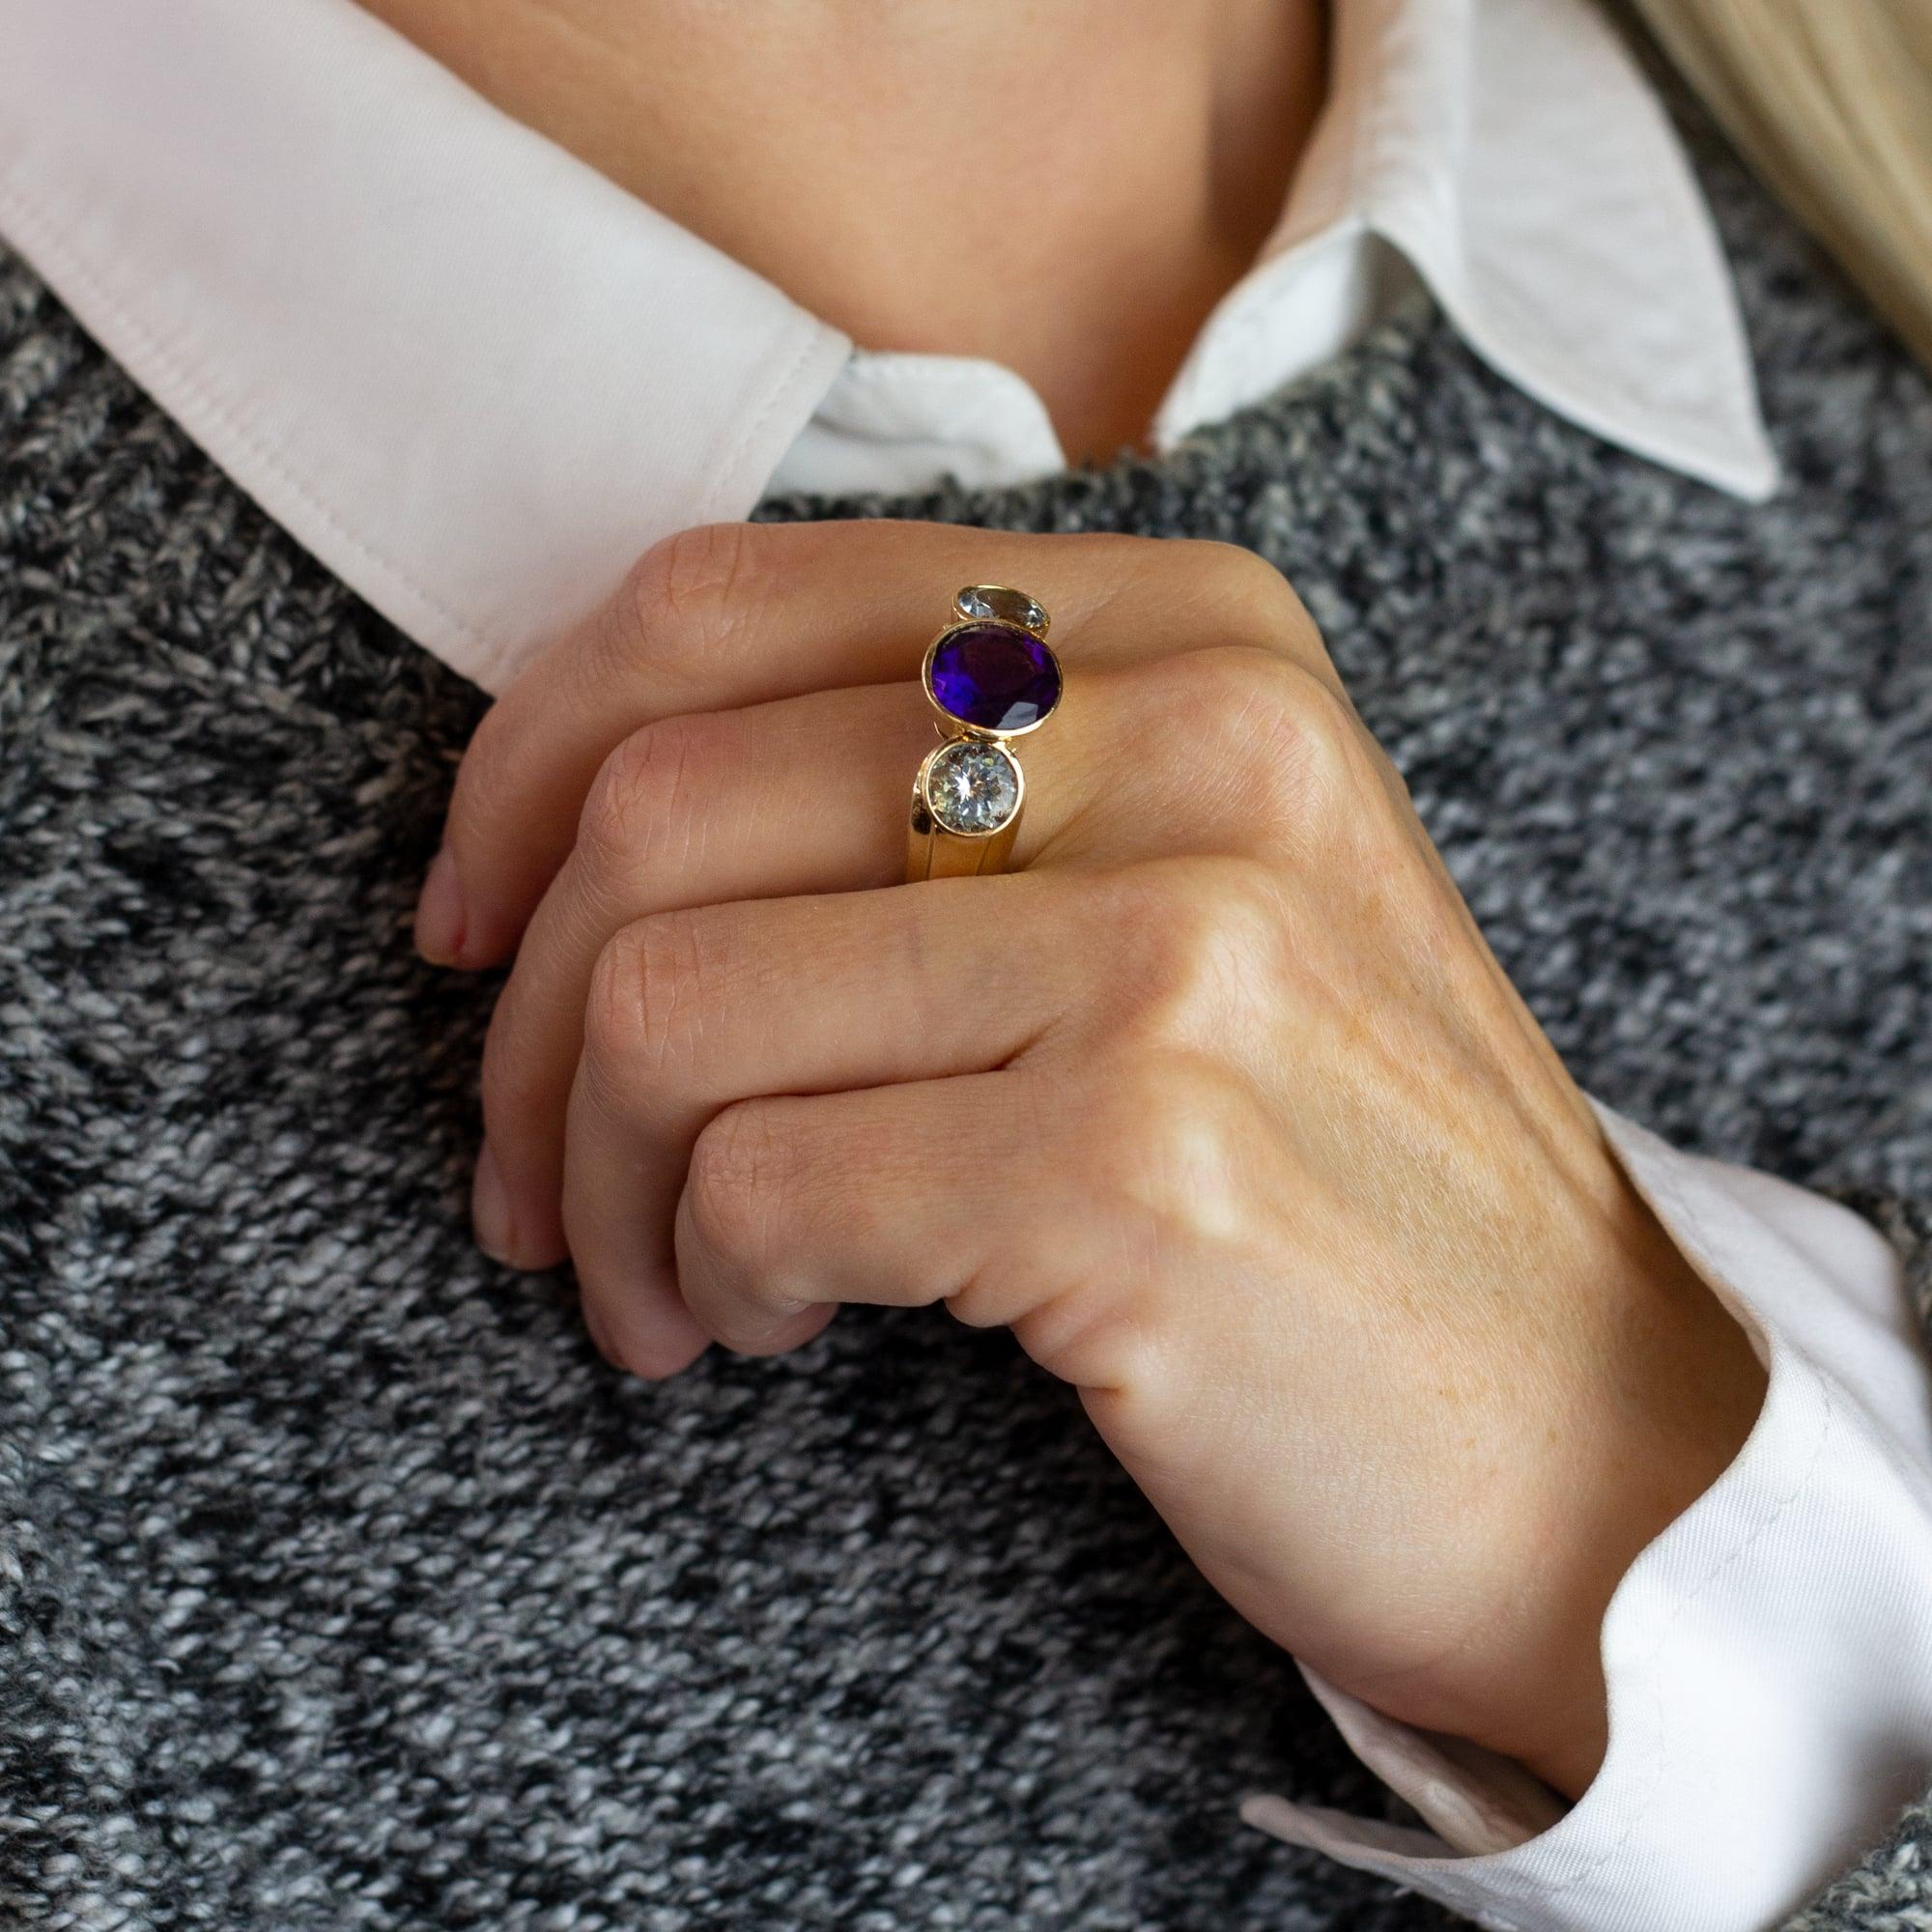 A bold 14 karat yellow gold dress ring set with a pair of aquamarines and a single amethyst. The three stone ring features tapered grooved shoulders and centres on a single round amethyst weighing 3.0 carat, flanked by a pair of round aquamarines